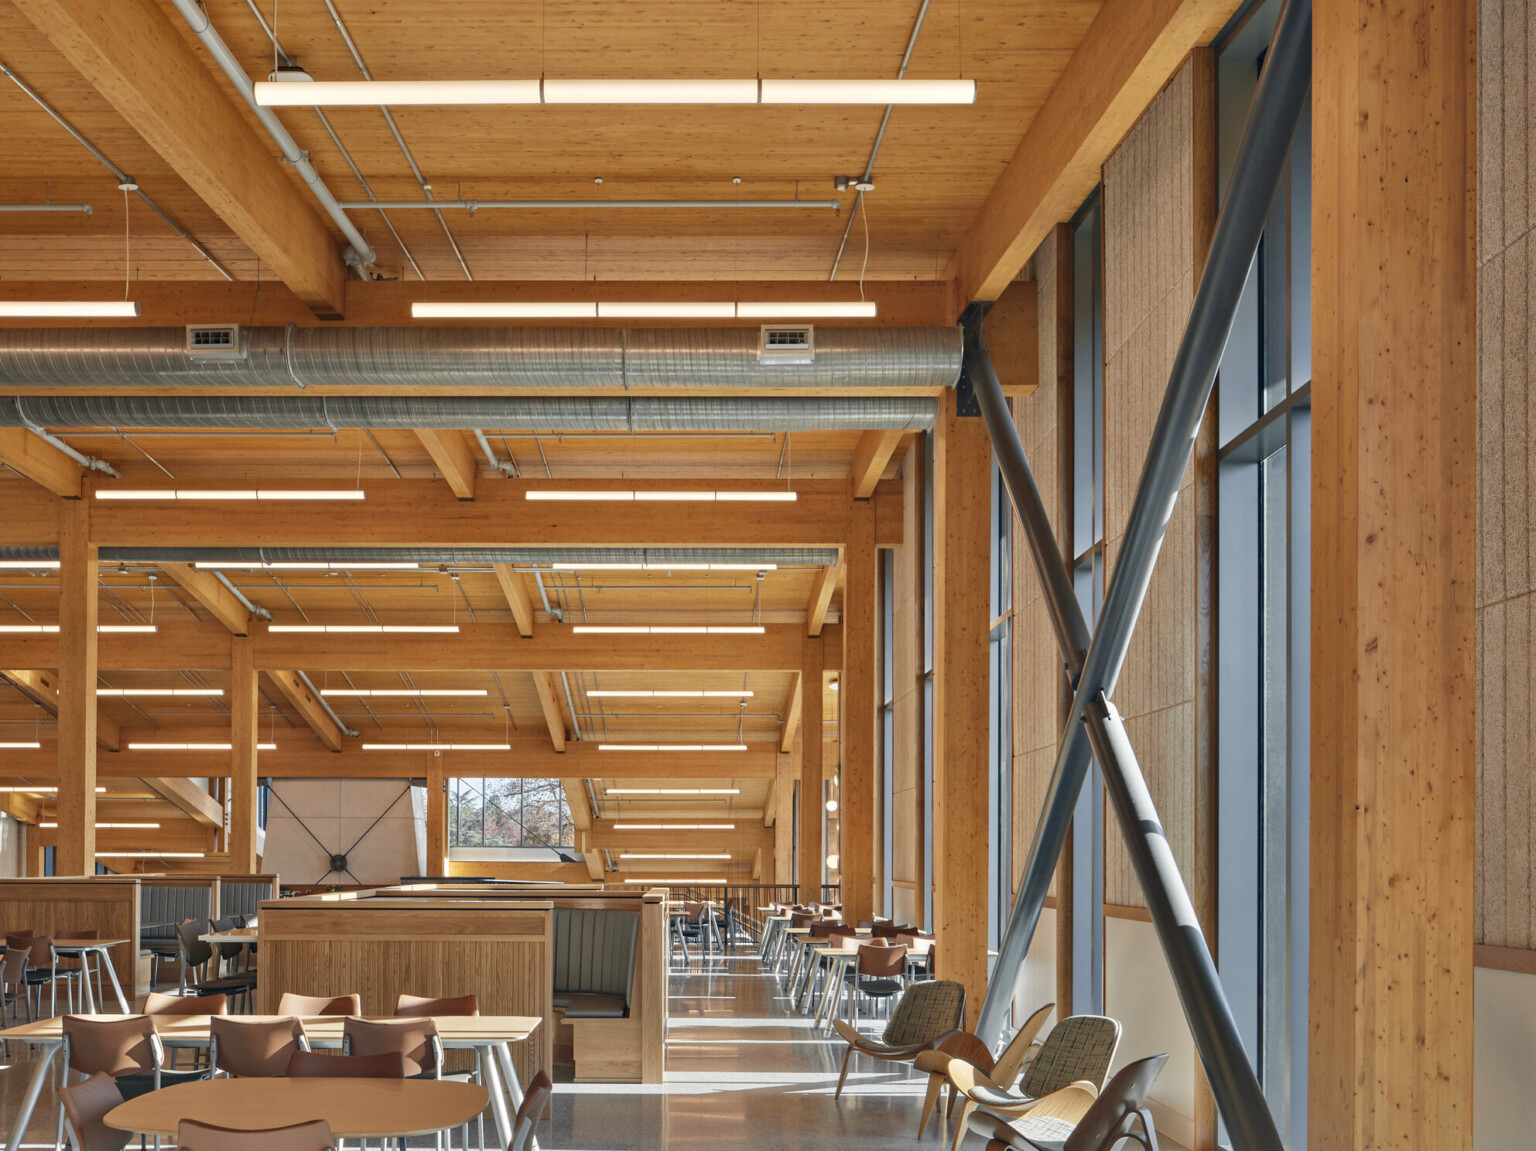 mass timber triple-height ceilings and stone walls, overhead energy-efficient low-wattage lighting, exposed ducting, steel supports, floor-to-ceiling windows provide natural light, wood and steel seating